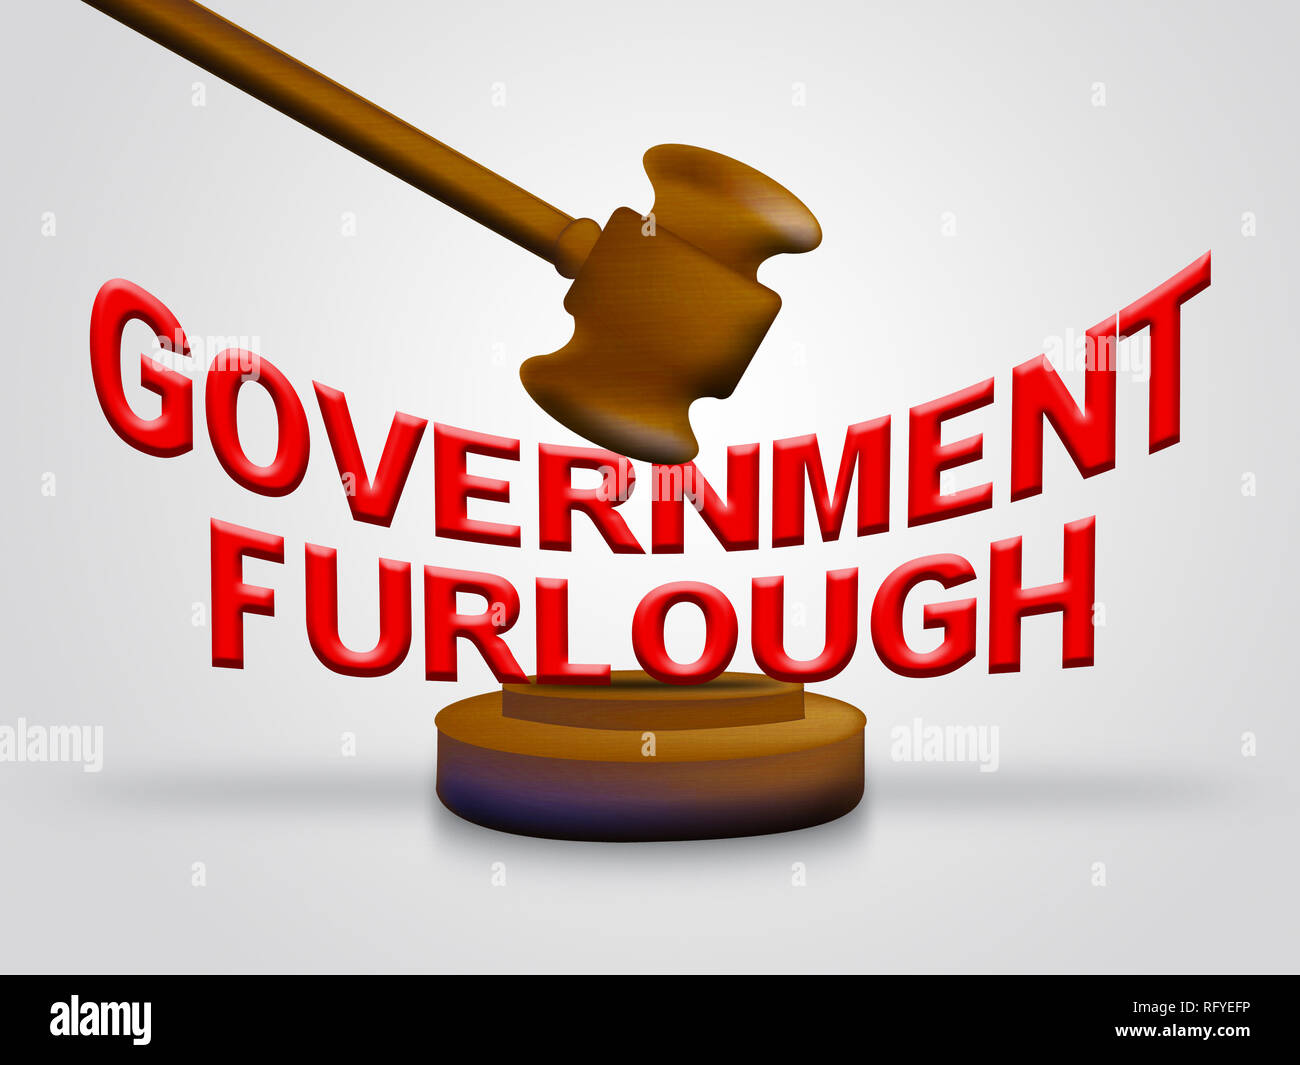 Government Furlough Gavel Means Layoff For Federal Workers. National Shutdown From Washington - 3d Illustration Stock Photo